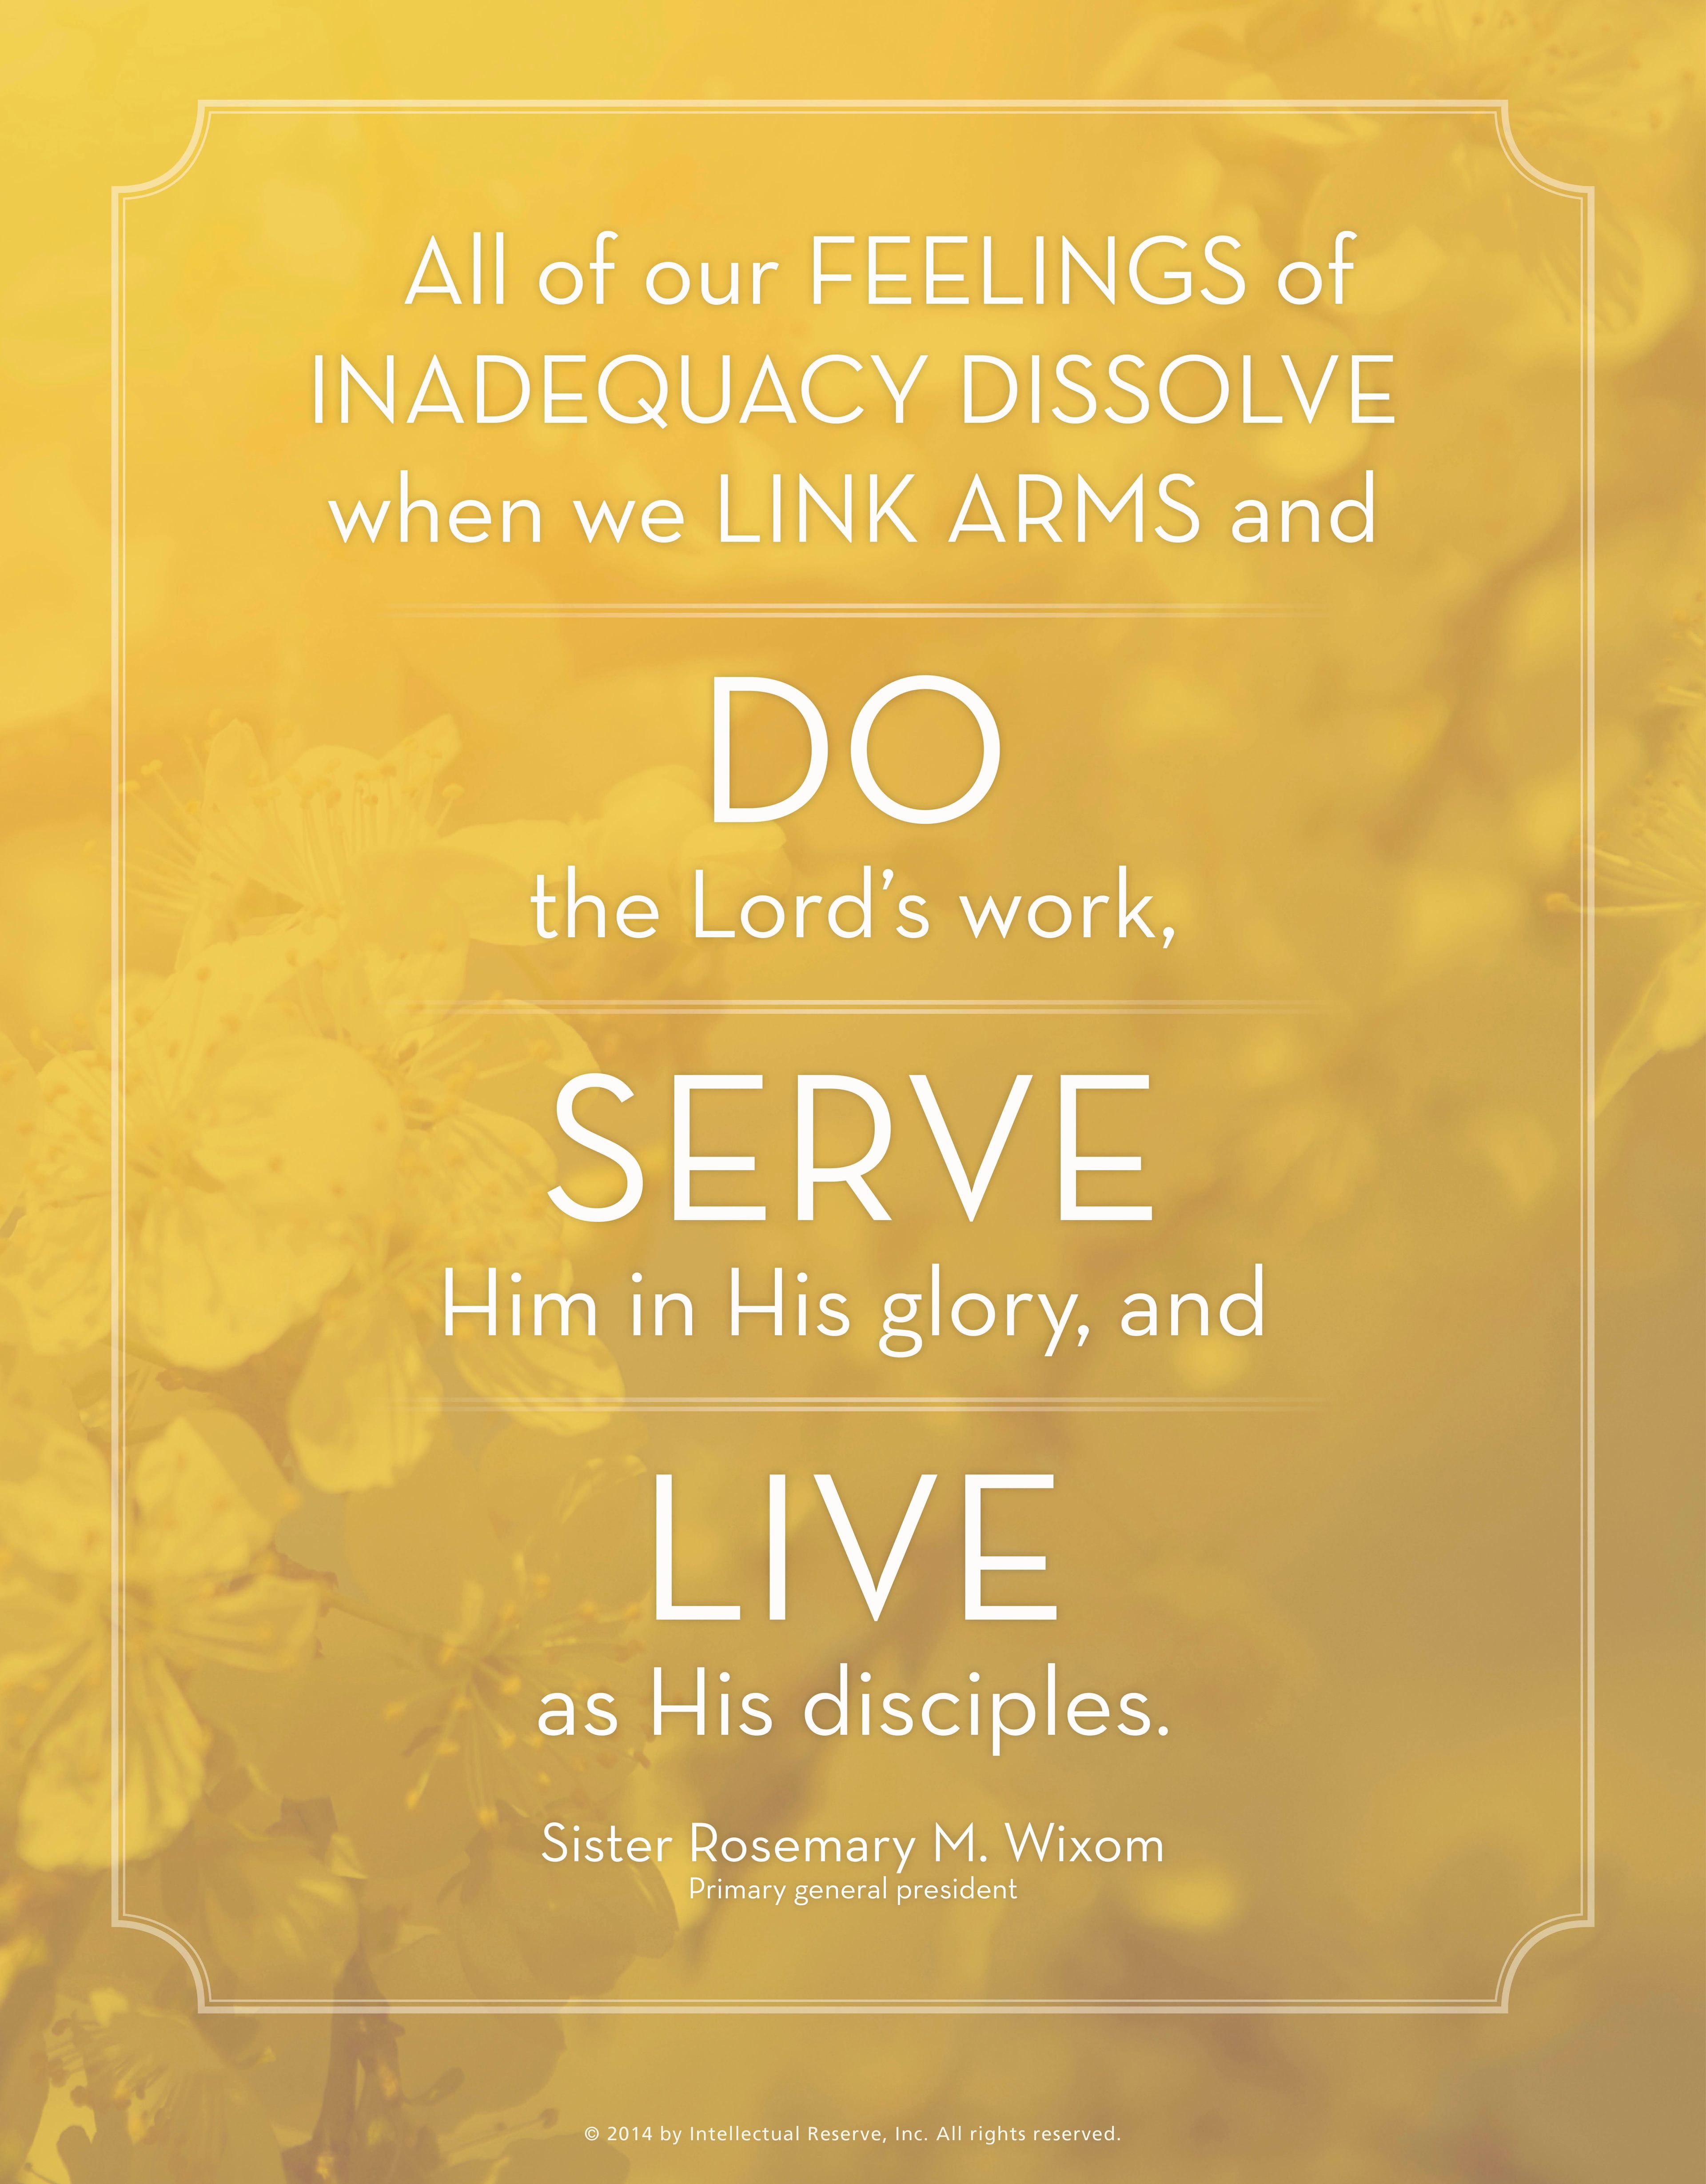 “All of our feelings of inadequacy dissolve when we link arms and do the Lord’s work, serve Him in His glory, and live as His disciples.”—Sister Rosemary M. Wixom, “A Conversation with the R.S., Y.W., and Primary Presidents”